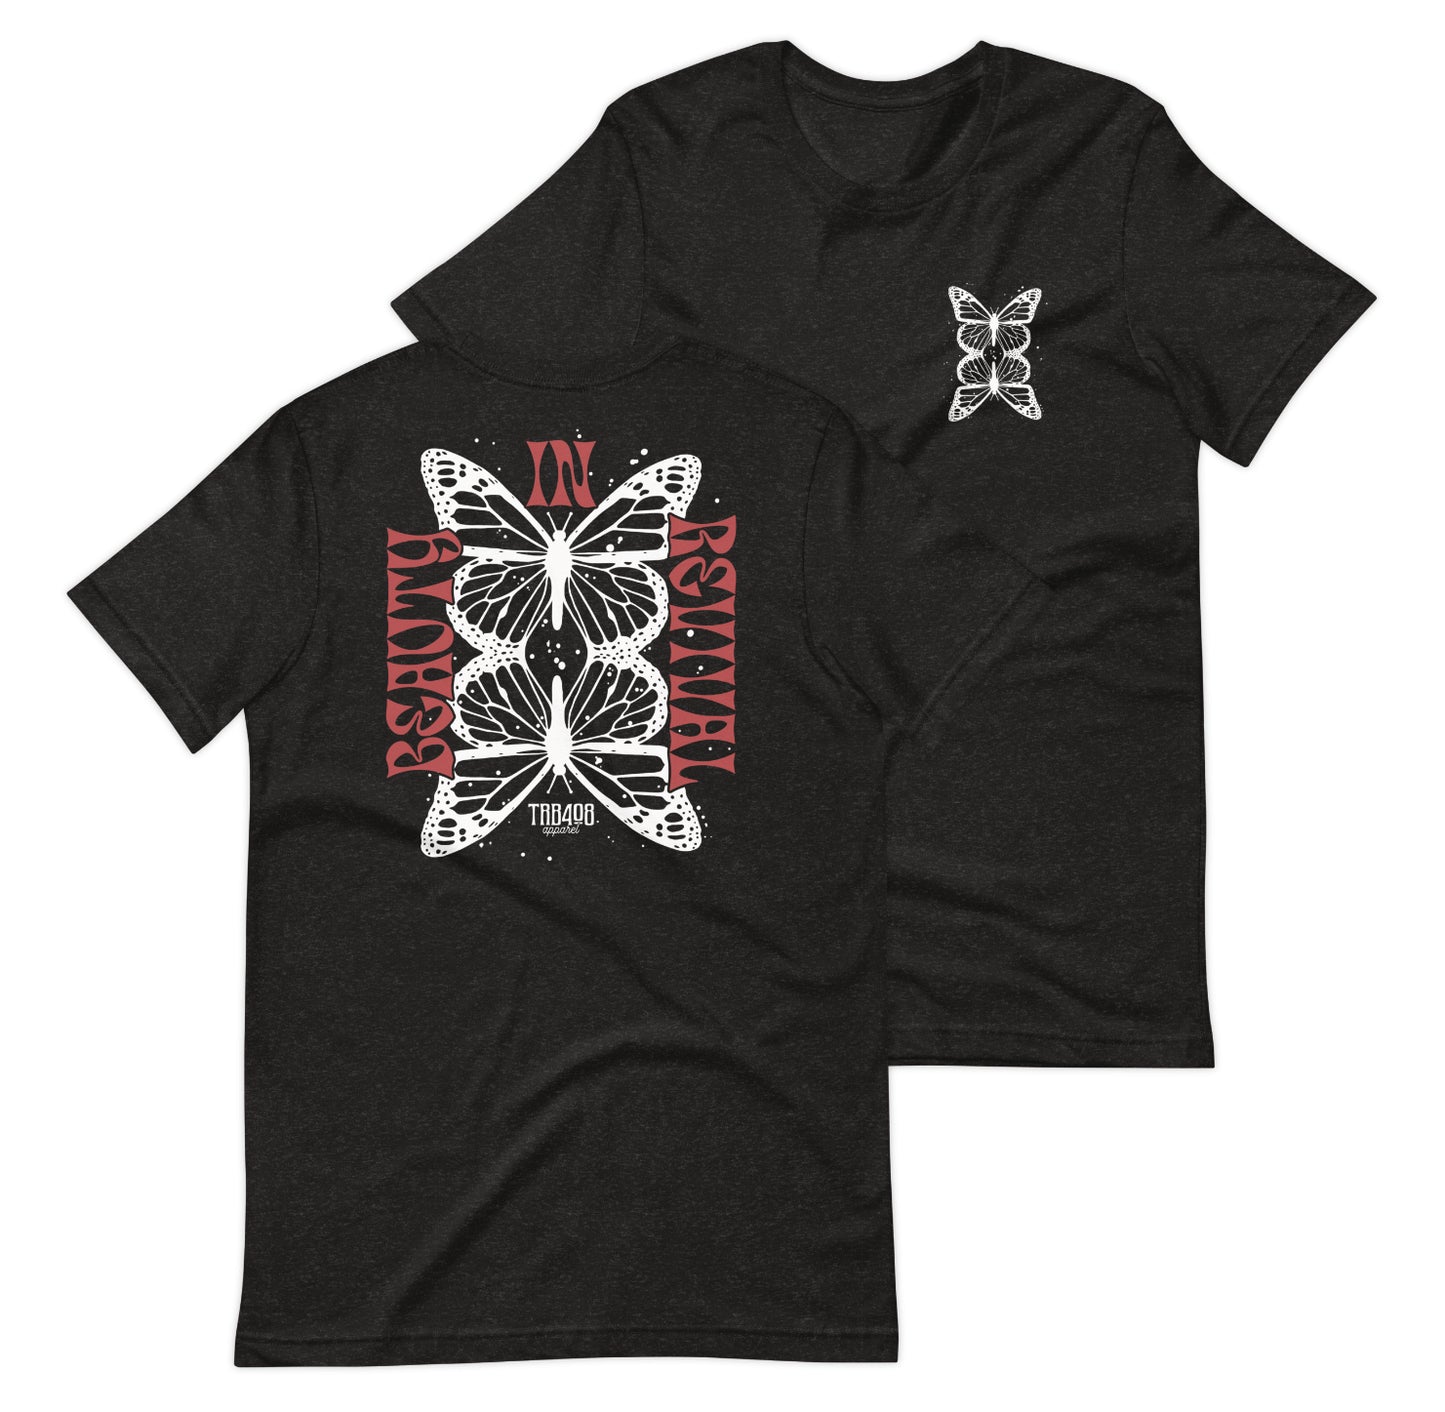 The BUTTERFLY Tee